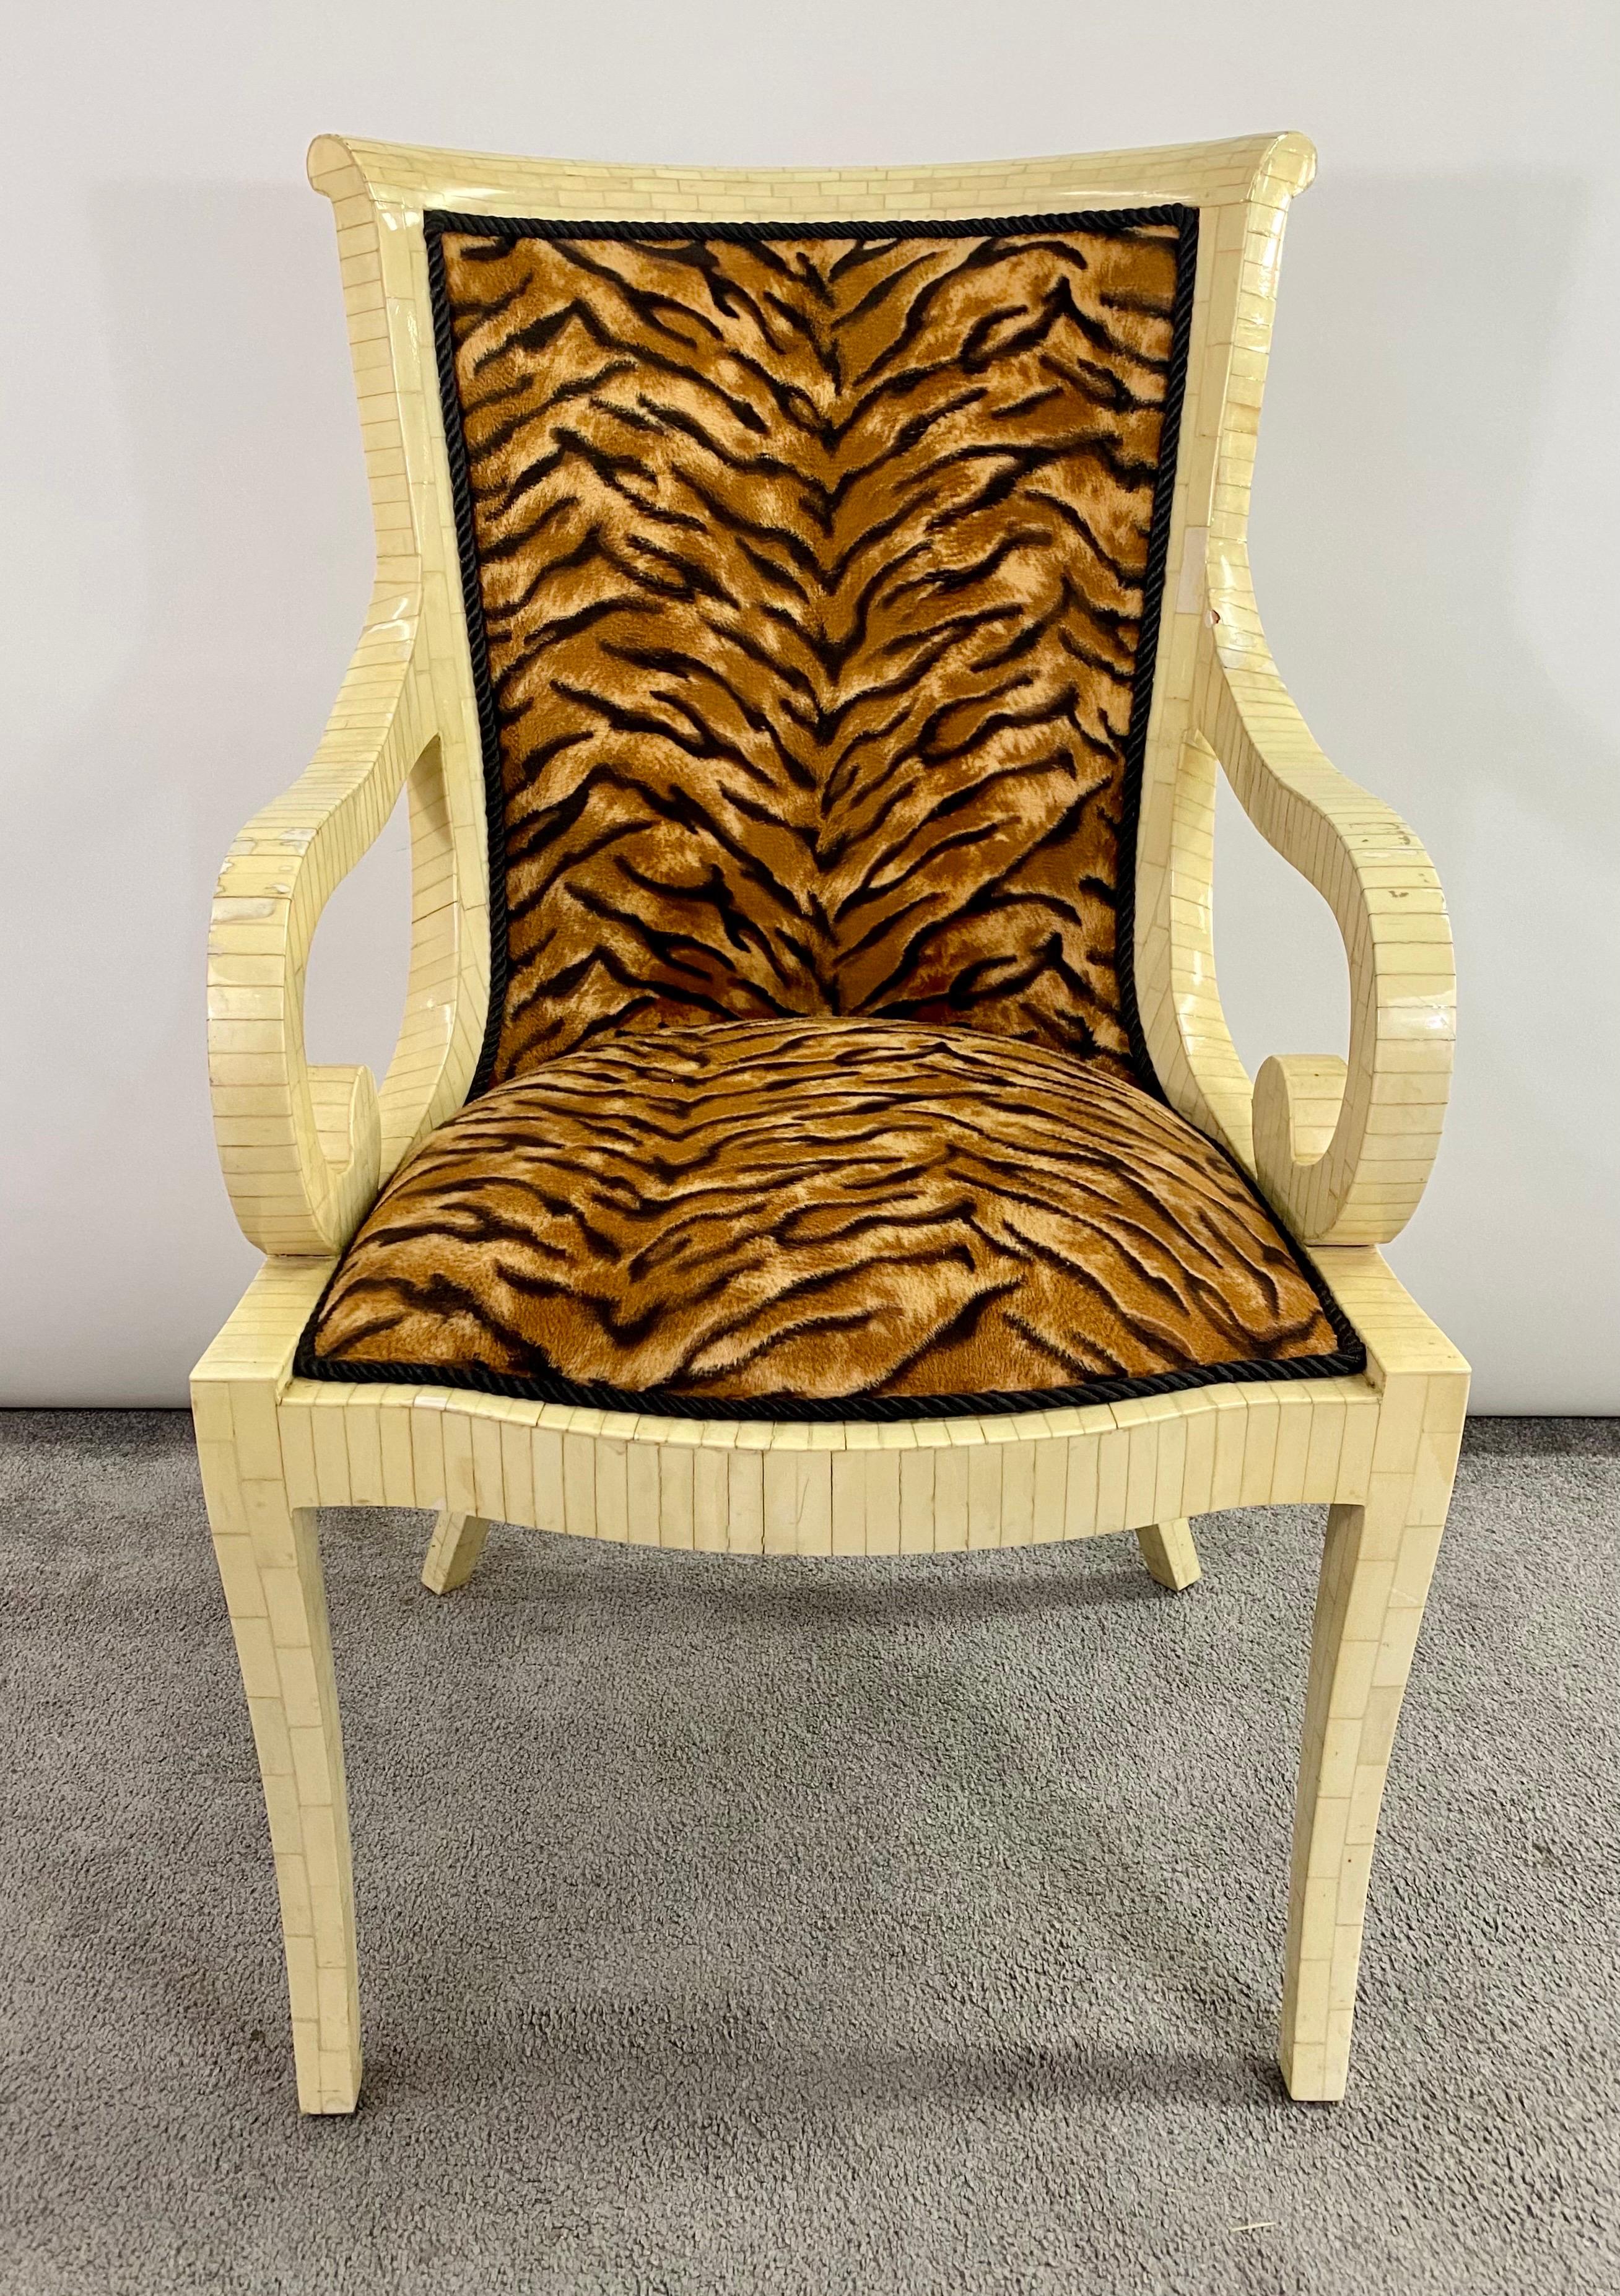 Pair of Enrique Garcel off-white bone style armchairs. Each tessellated form armchair with scrolling arm and body type. Both stylish and sleek showing off a nice leopard upholstery fabric. Having been previously touched up in a professional